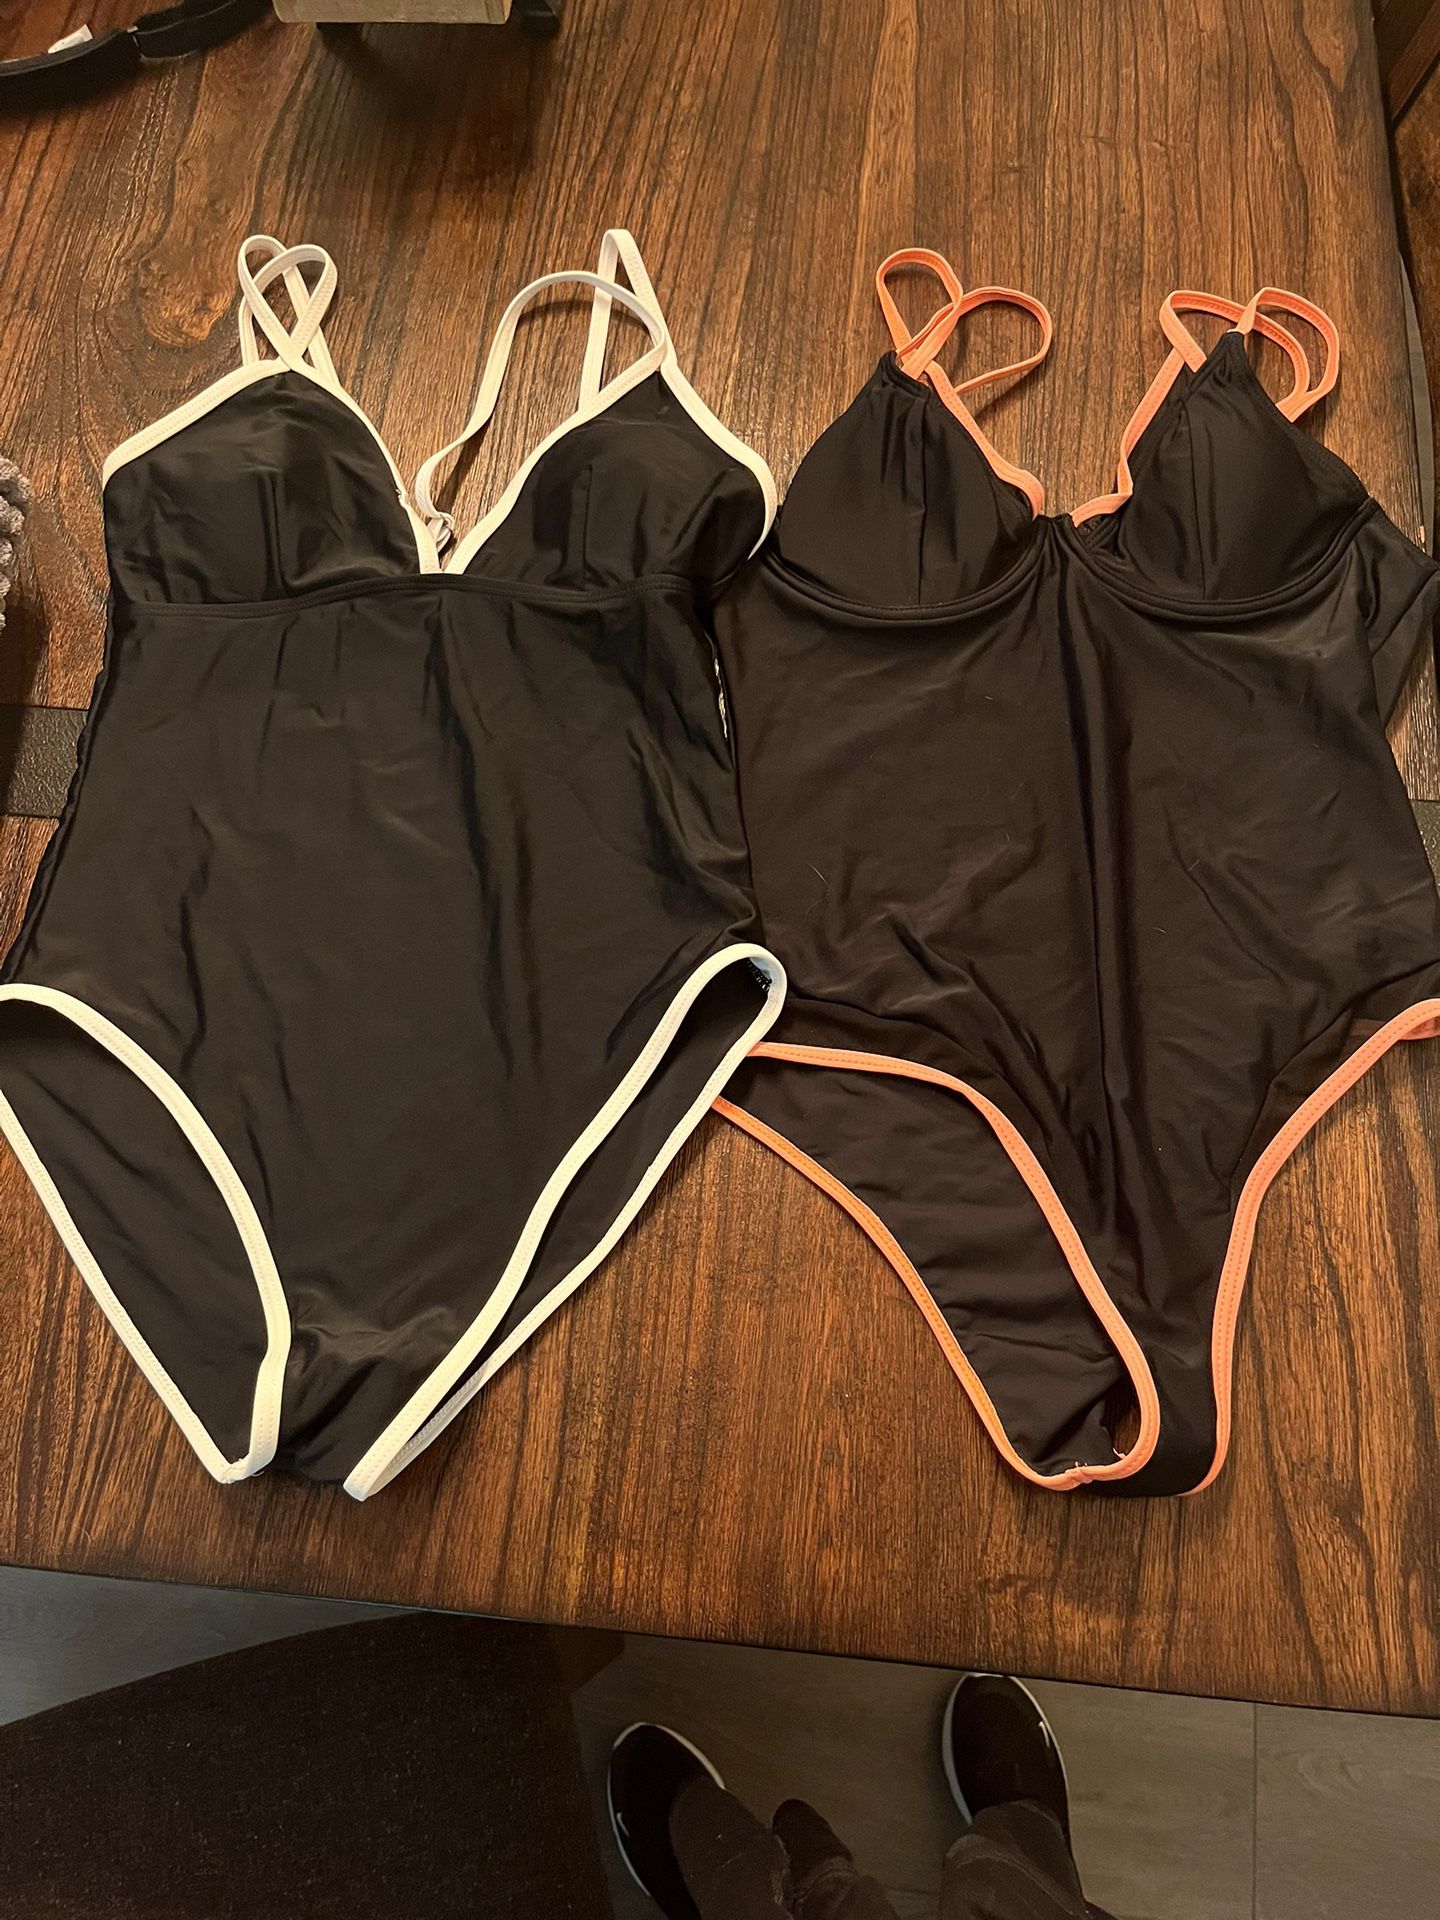 2 Swimsuits & 2 Cover Ups